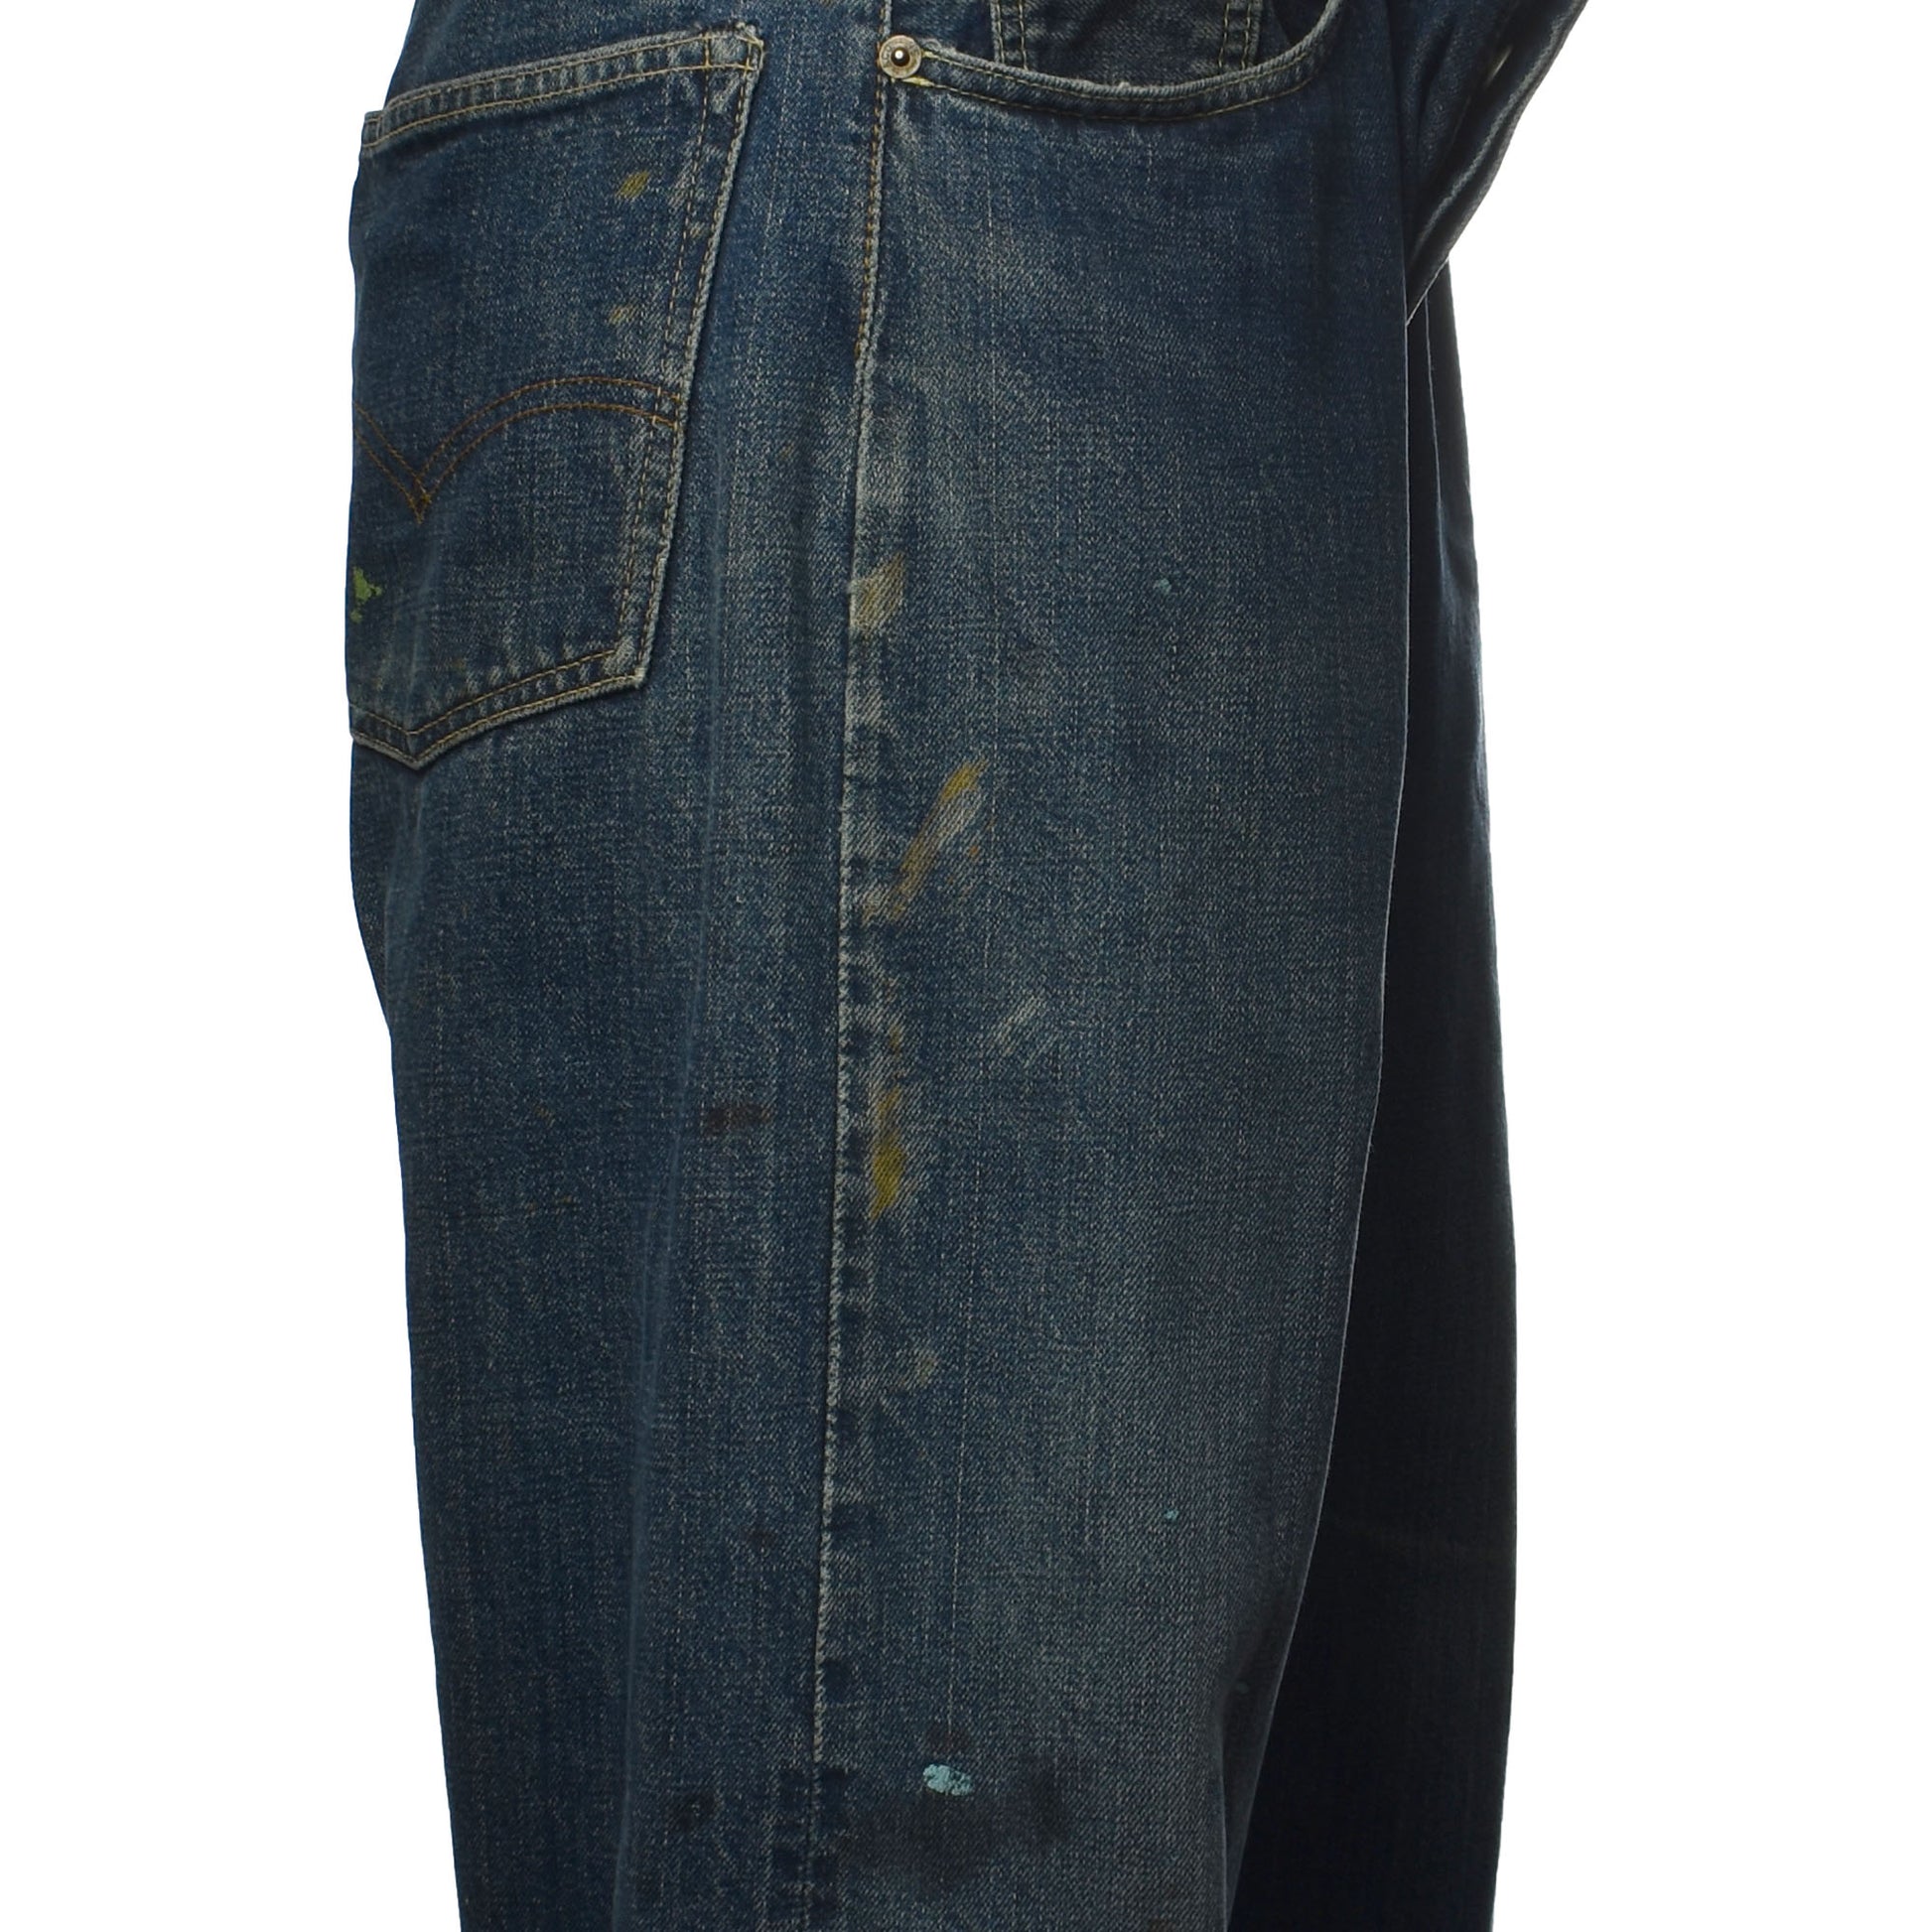 Vintage Early-mid 1960's Levi's 501 Big E Selvedge Jeans with V Stitch –  Grayford's Since 1931